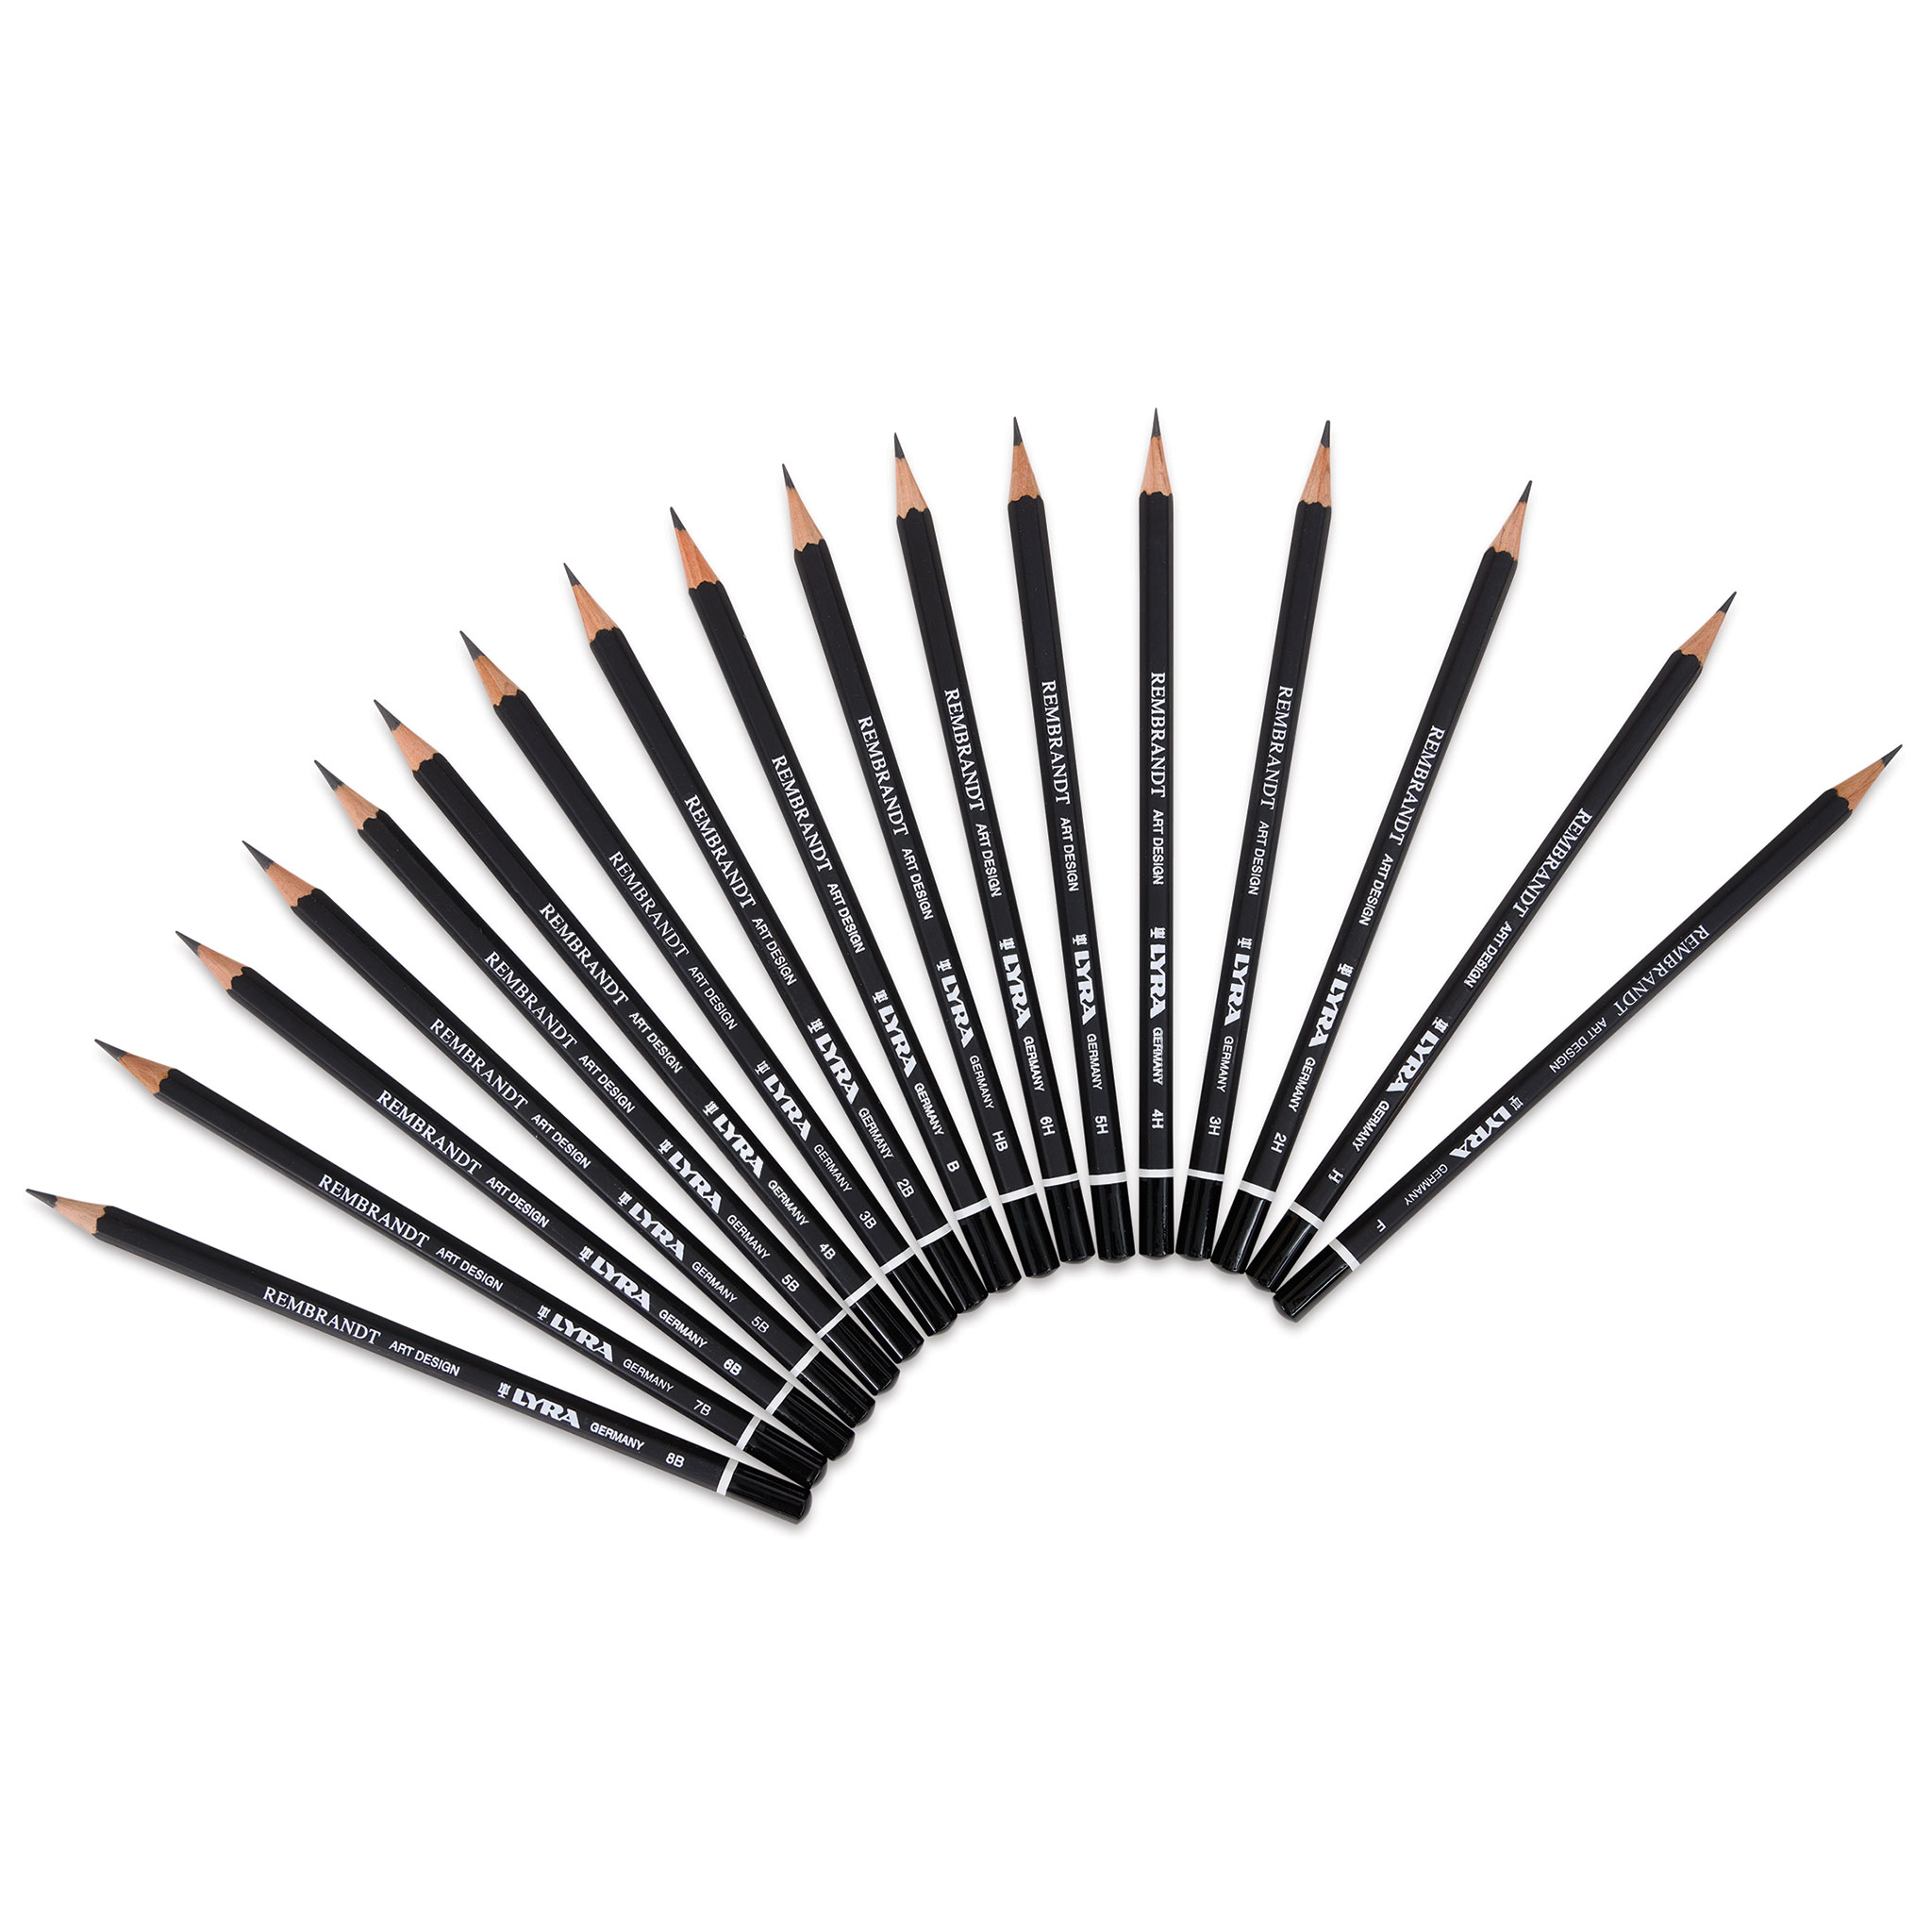 36 PCS Professional Sketch & Drawing Art Tool Kit With Graphite